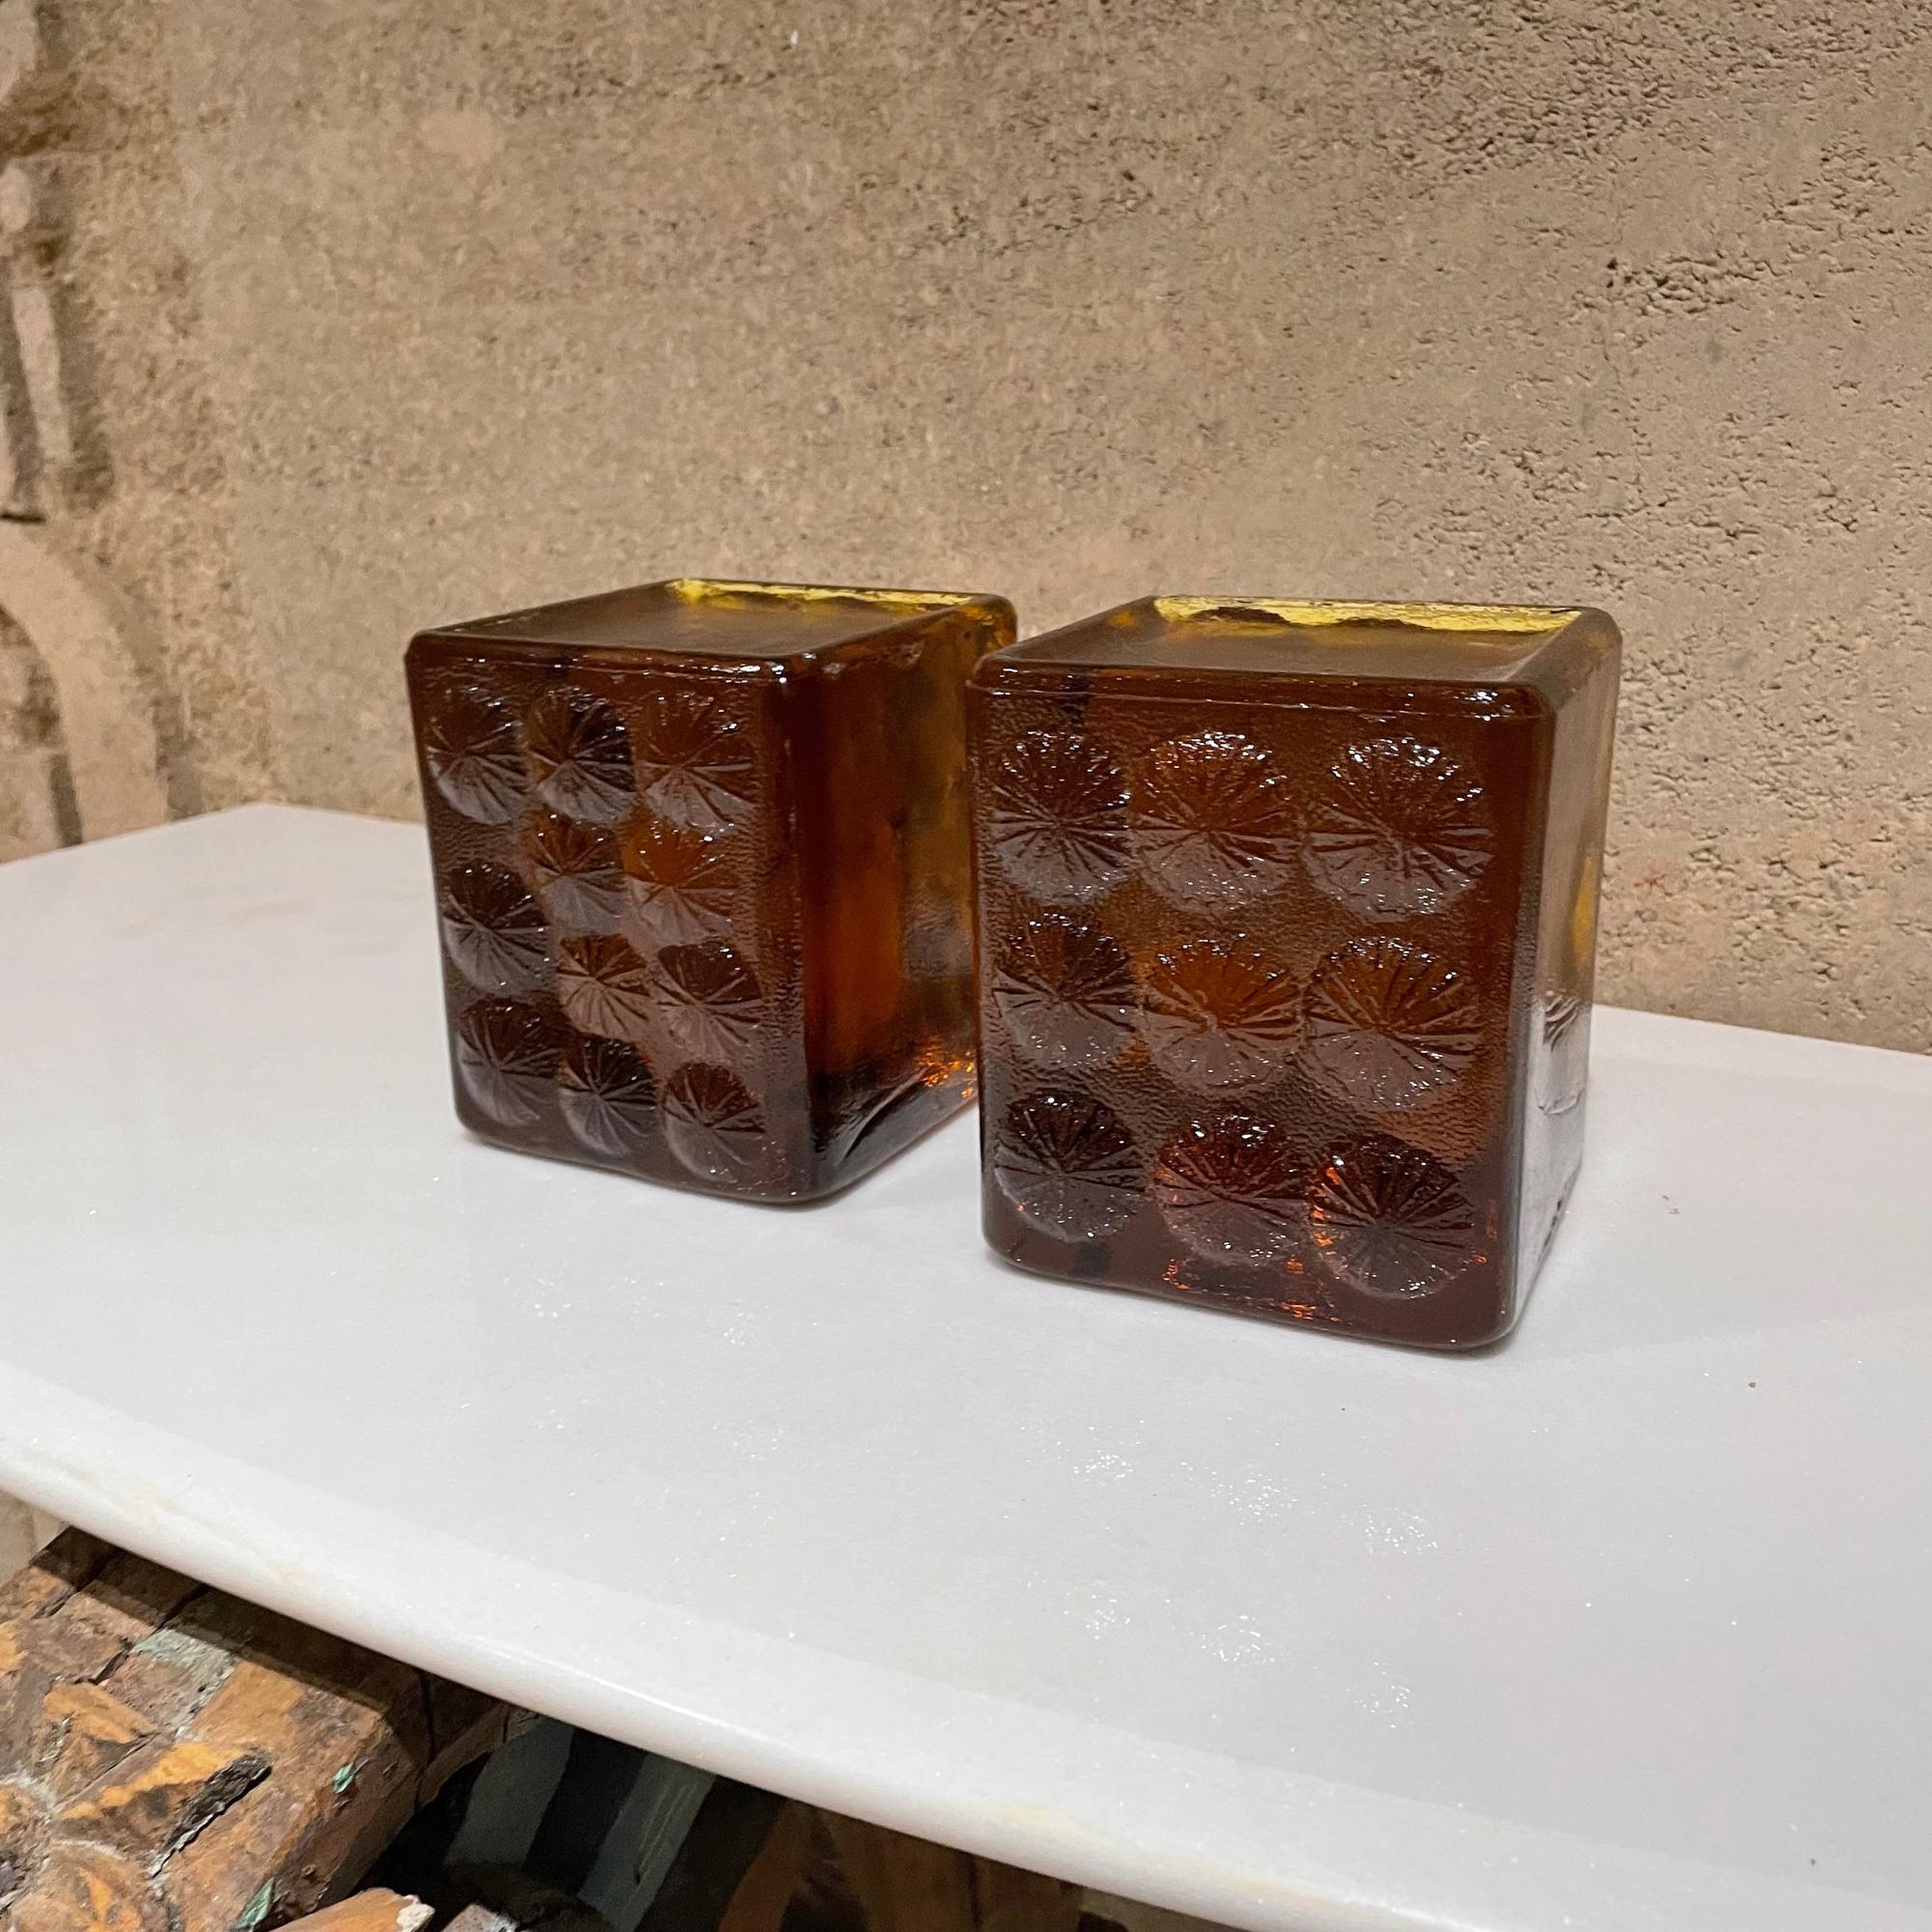 Glass Bookends
By Blenko abstract ice glass block sculpture modern bookends in amber glass 1967
By designer Joel Myers for Blenko Glass of West Virginia
Heavy pair of square amber colored pressed glass bookends with textured abstract flower